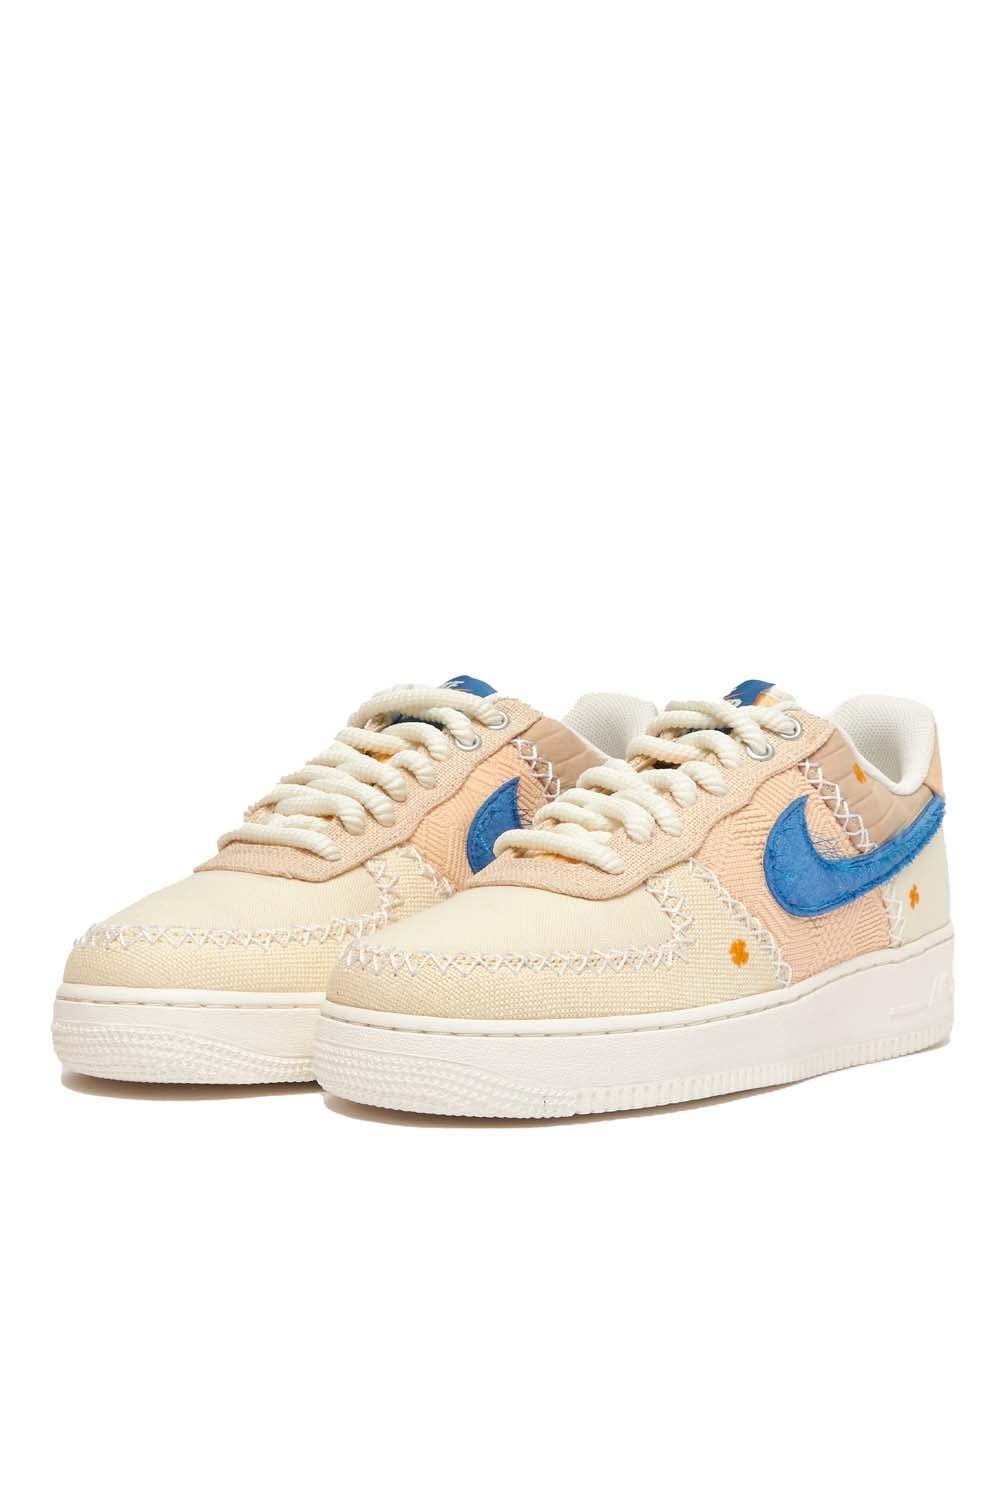 Nike Air Force 1 '07 Prm Shoes for Men | Lyst